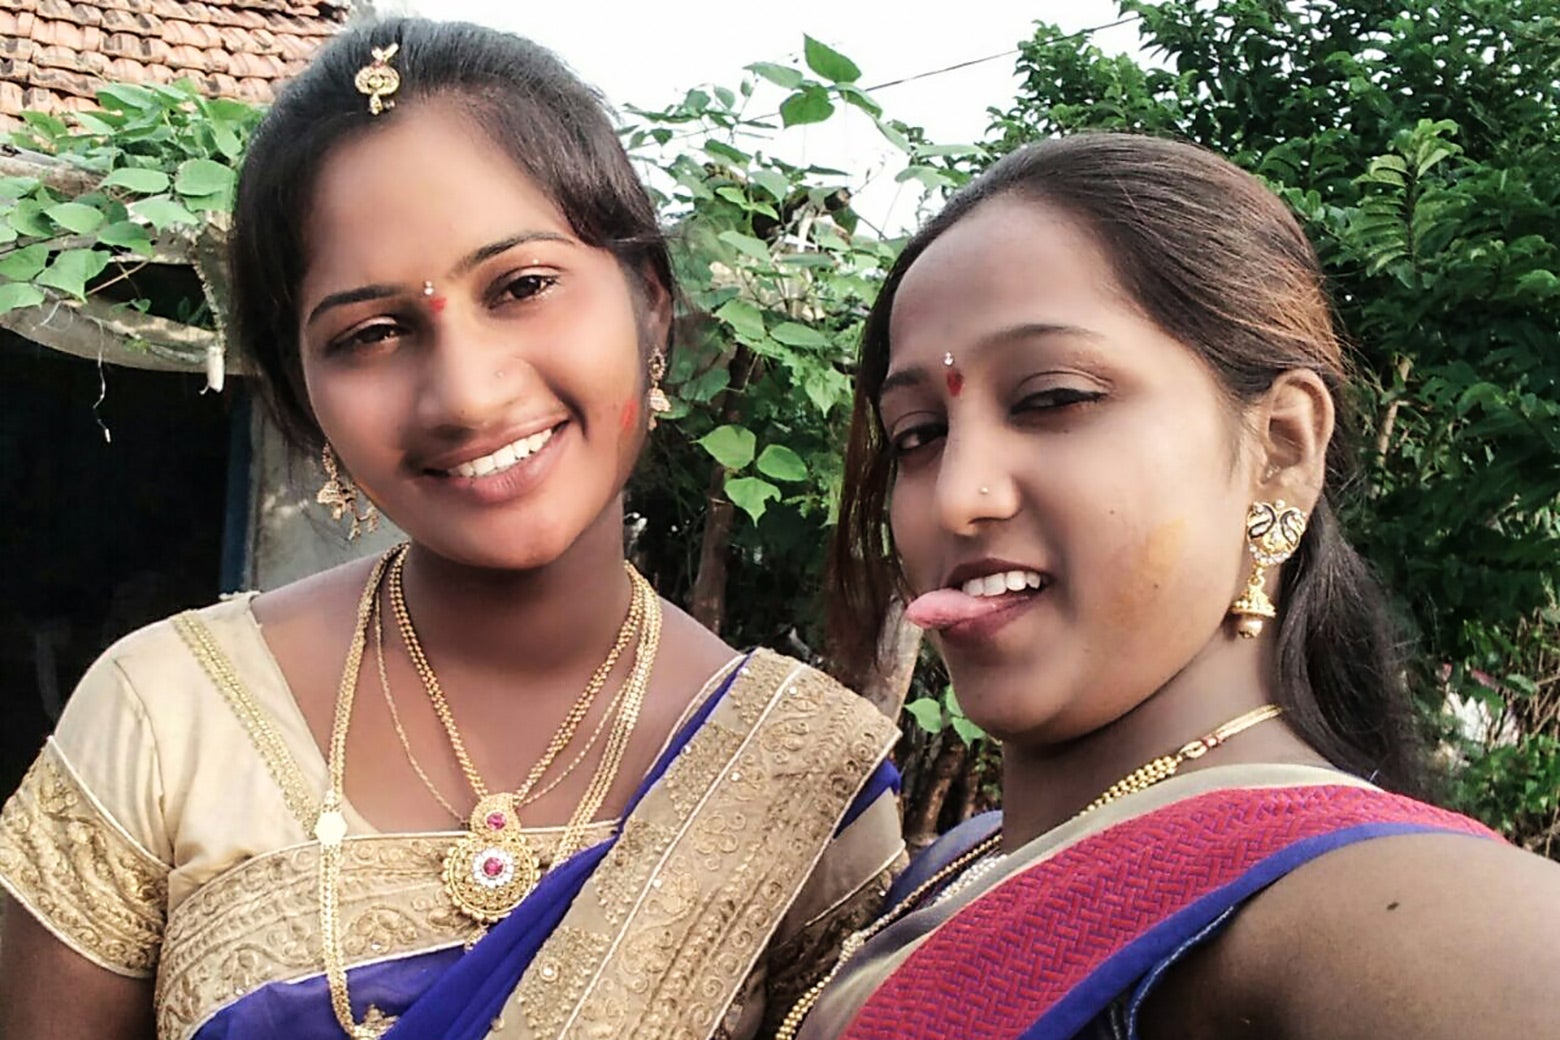 Preethi smiles into the camera, Reshma sticks her tongue out. The women have their arms around each other, each wearing saris and gold jewelry, with trees and a roof in the background